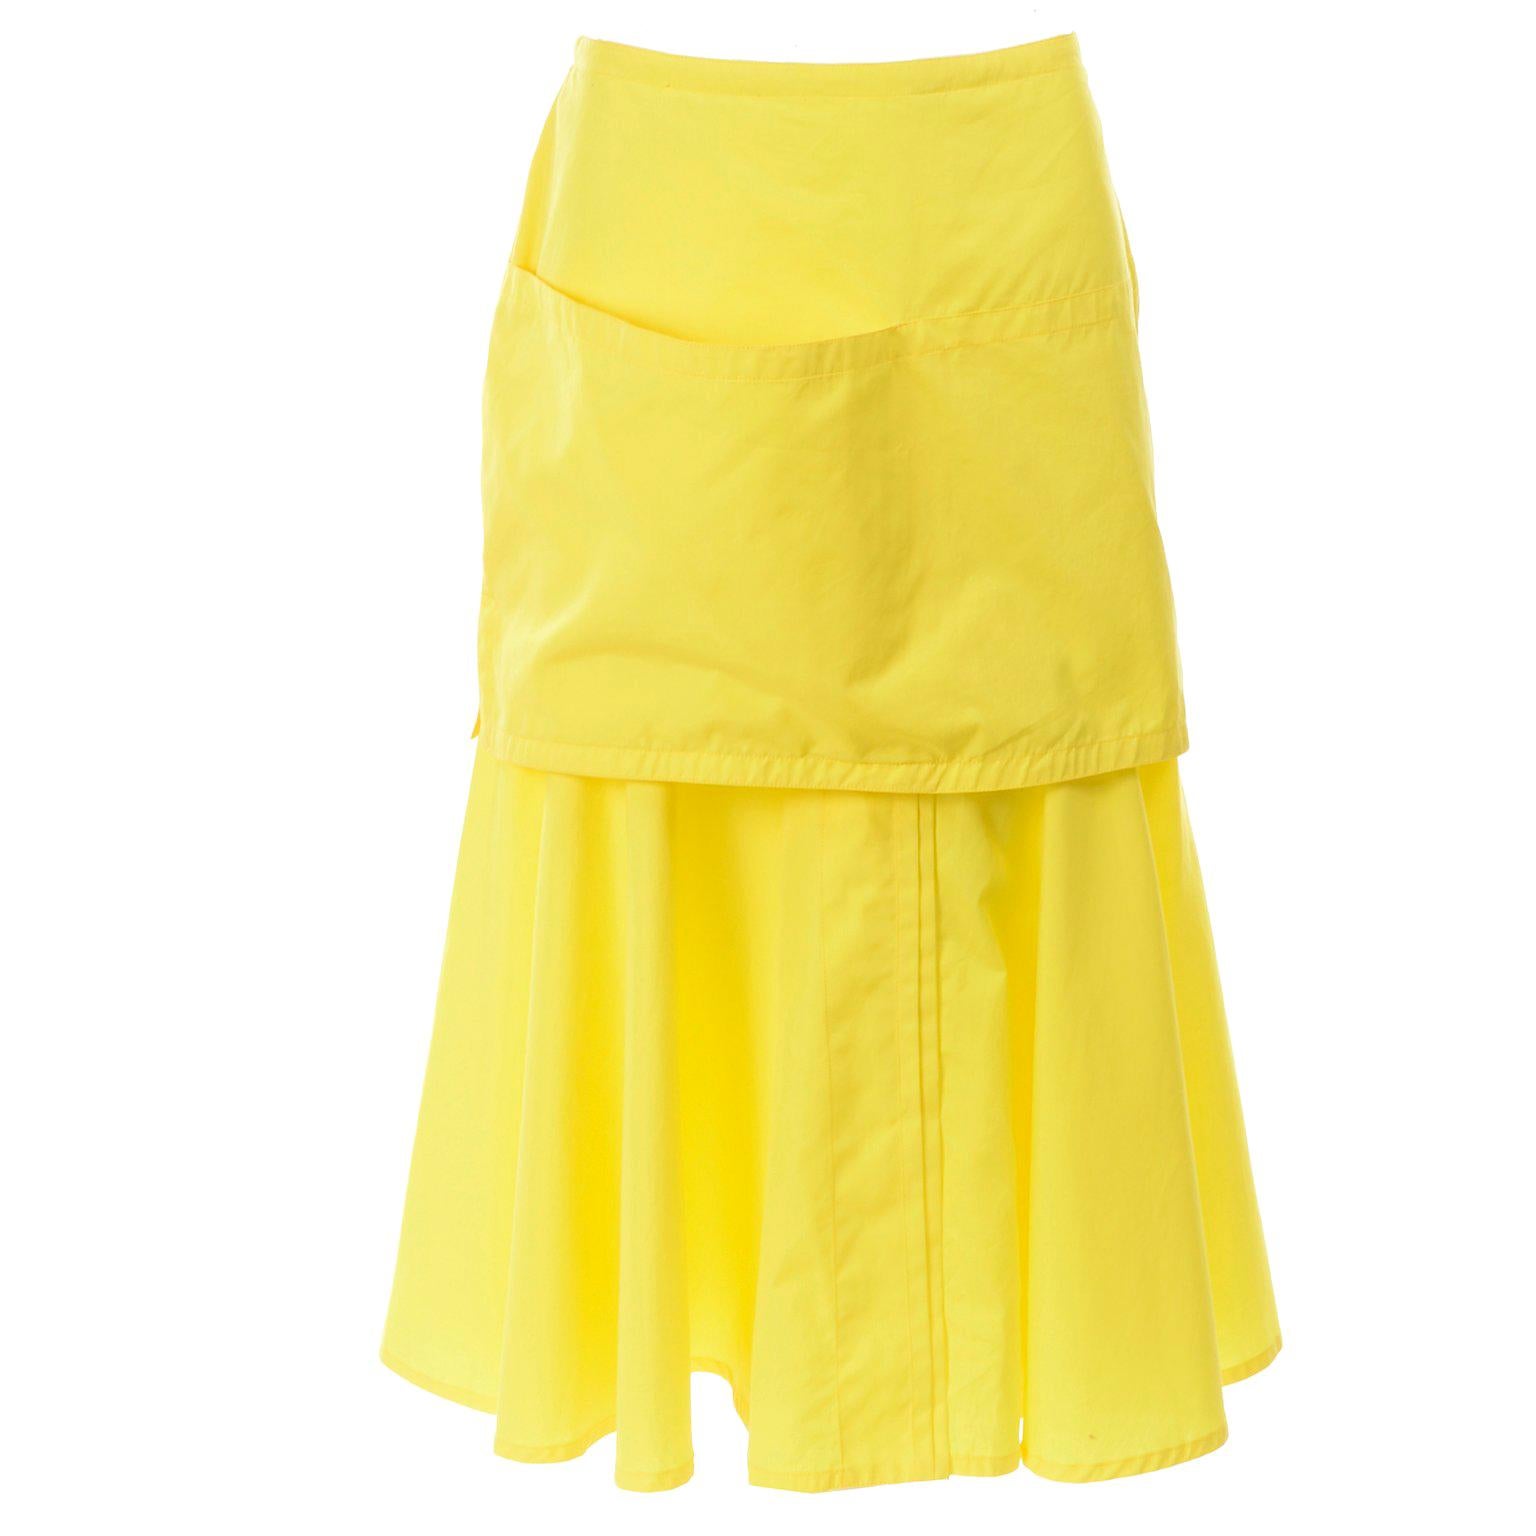 New 1980s Gianni Versace Yellow Cotton Flared Skirt w Front Pocket Apron w/ Tags For Sale